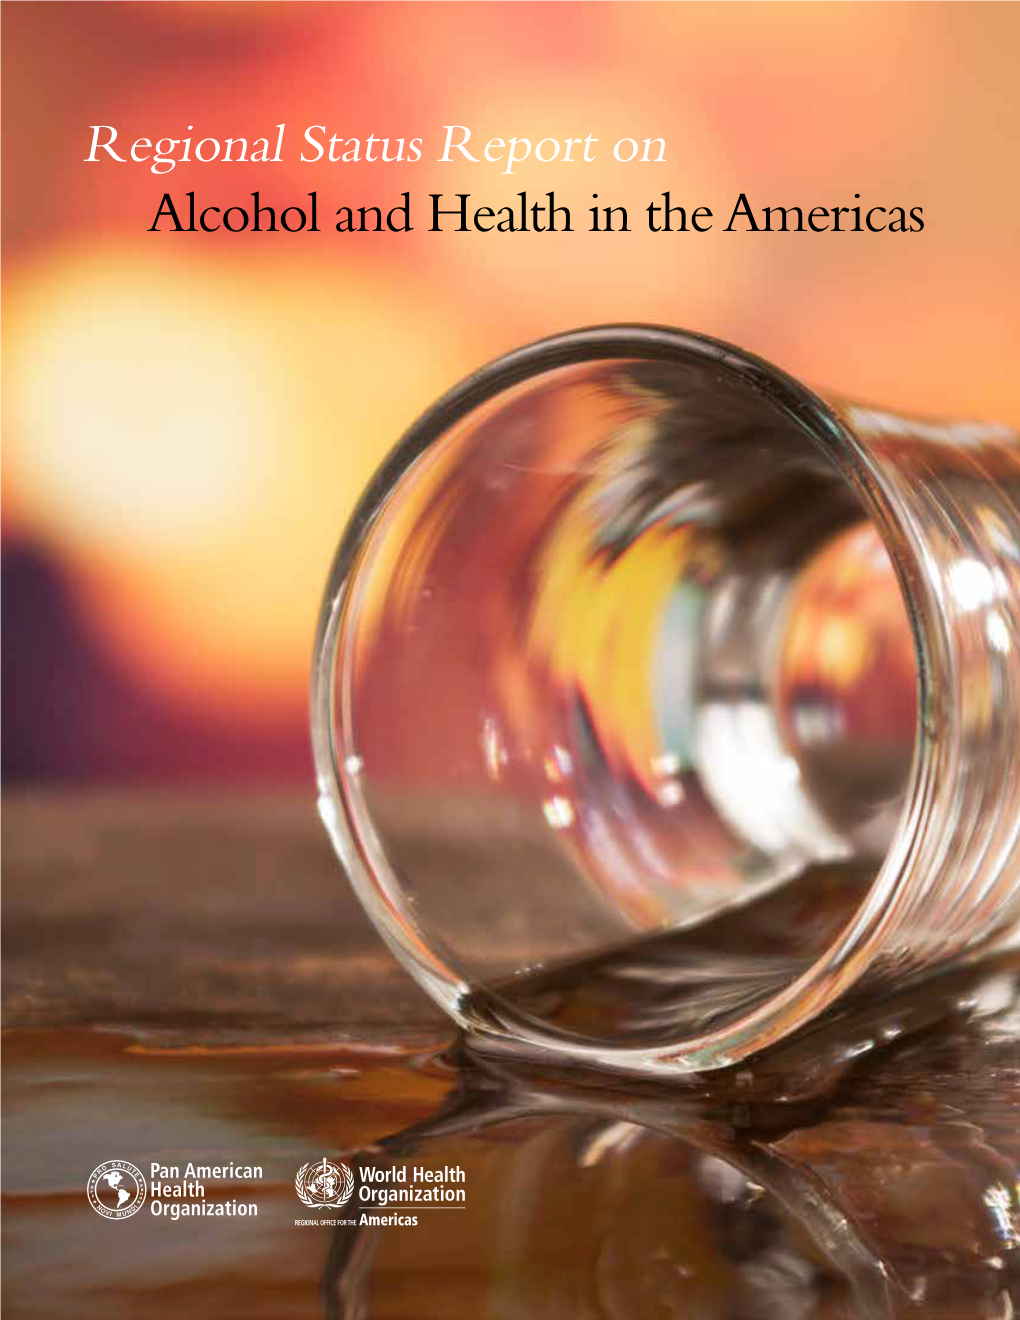 Regional Status Report on Alcohol and Health in the Americas